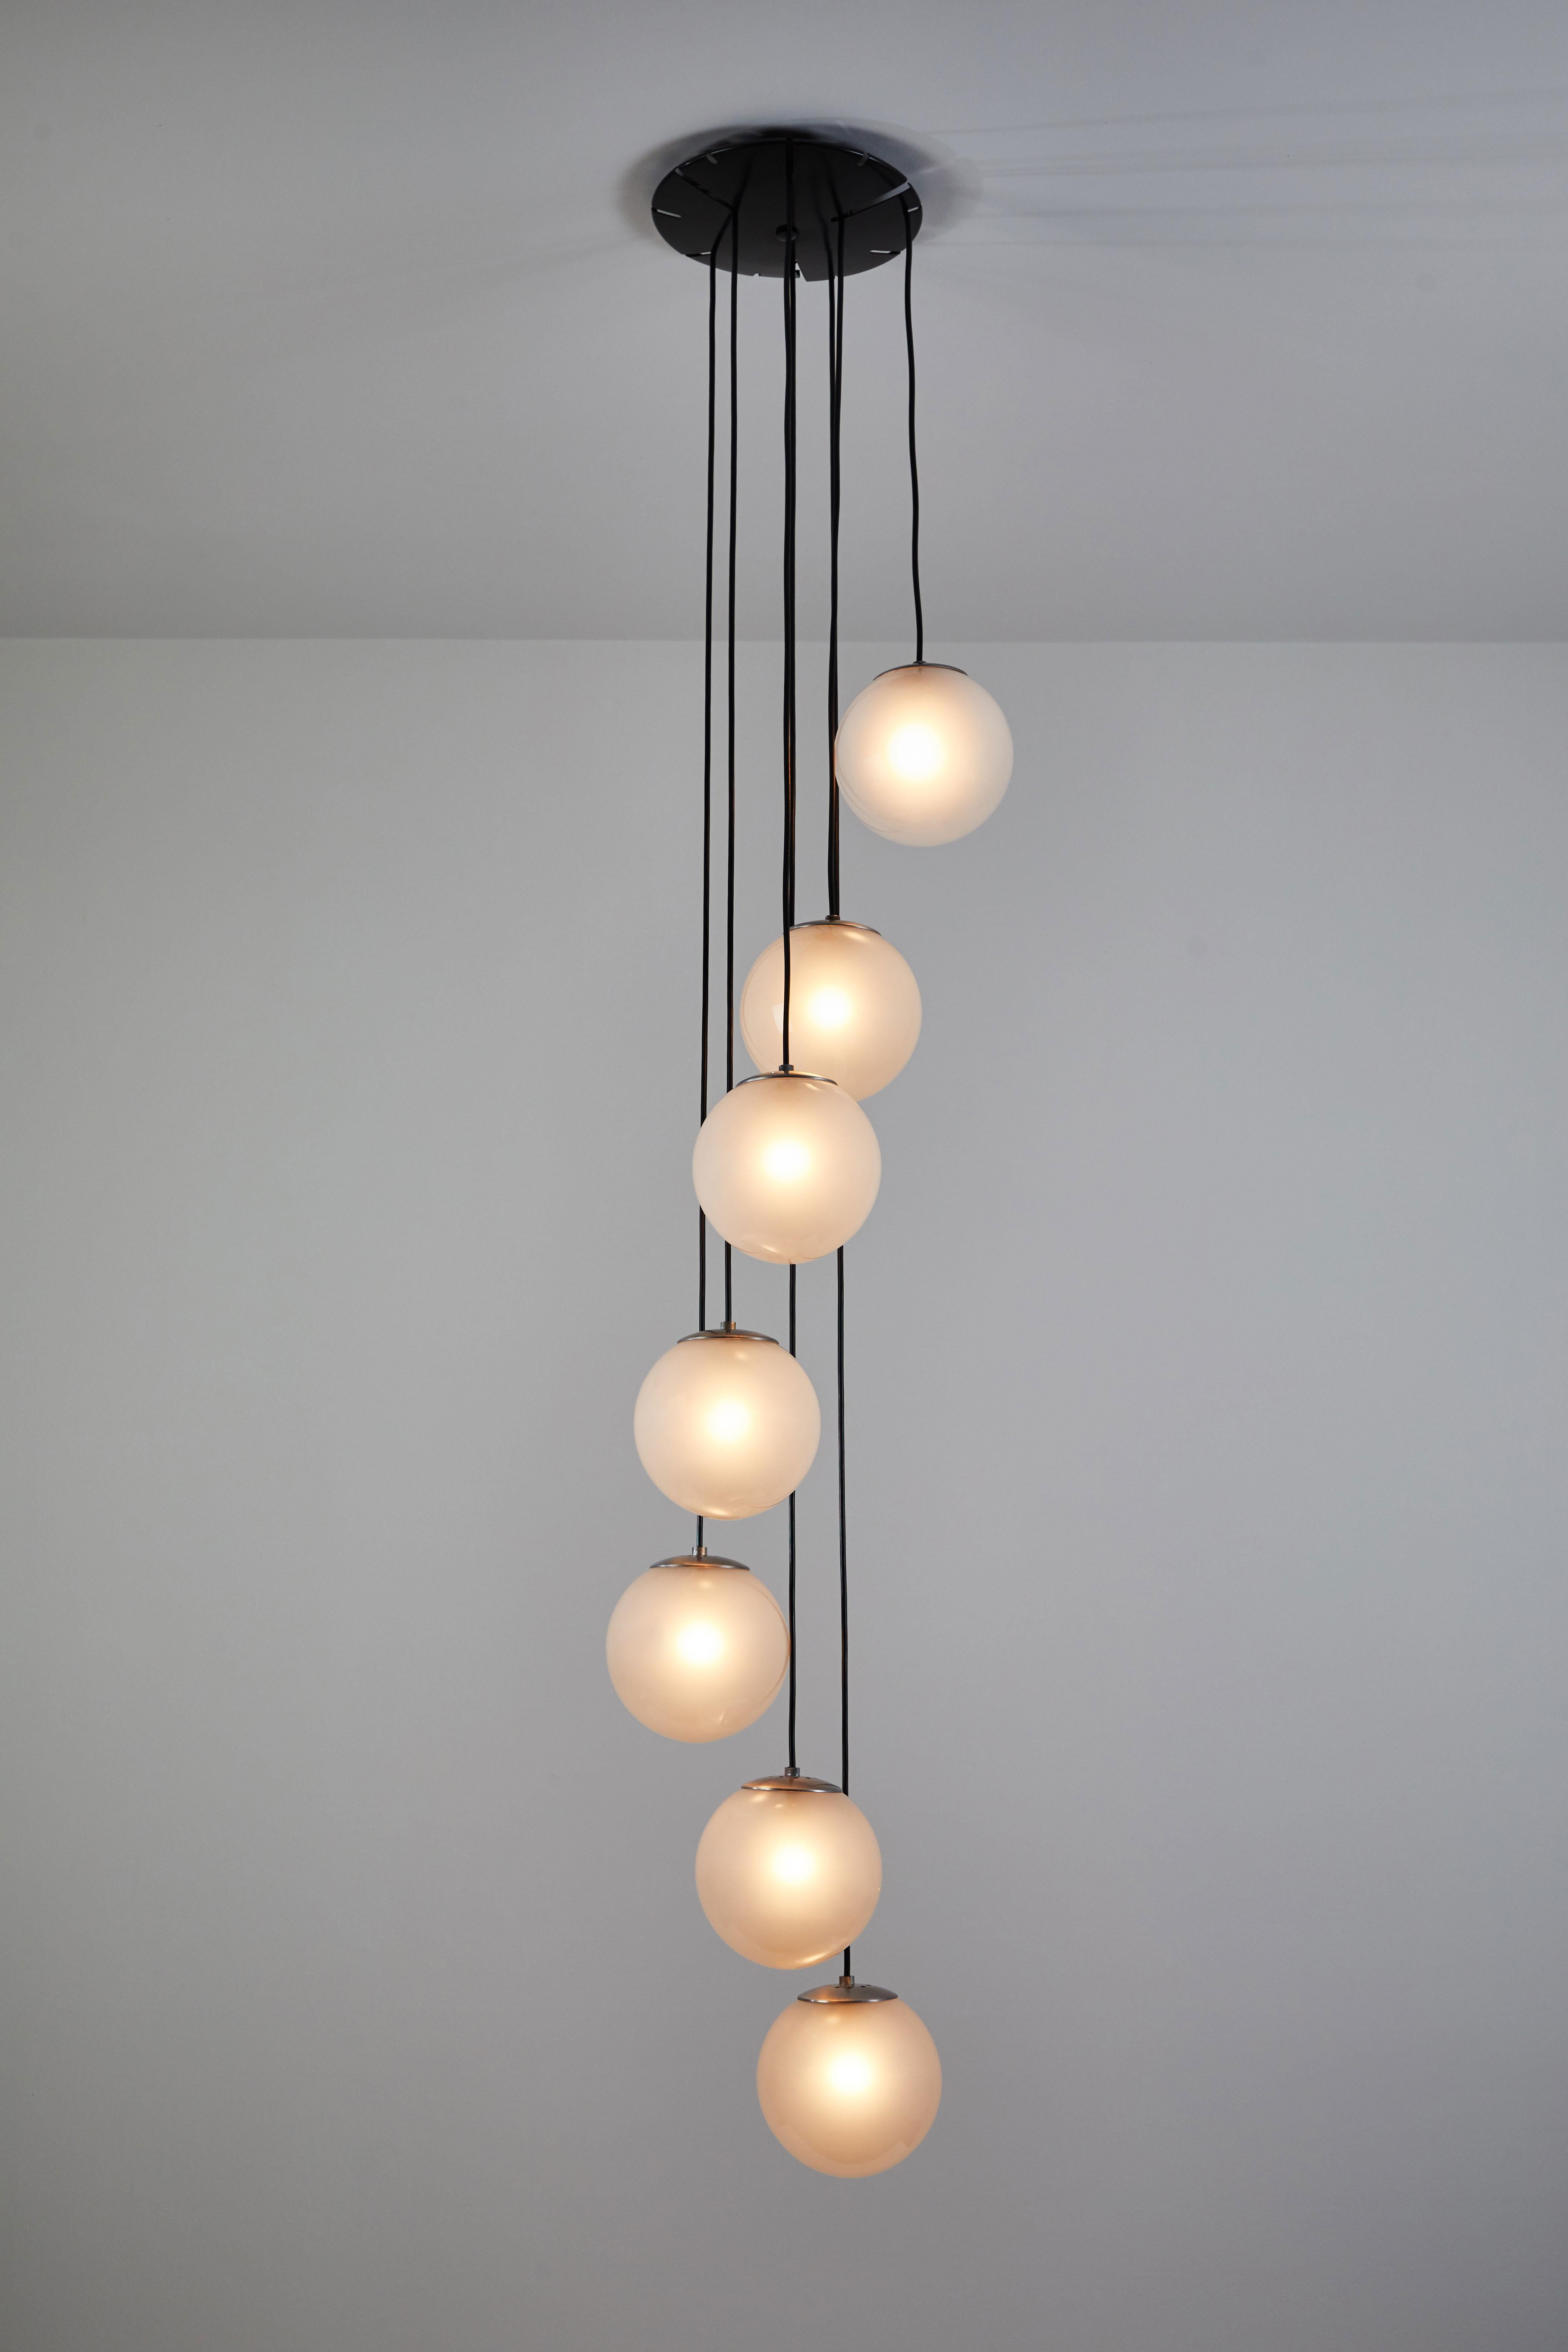 Model 2095/7 seven globe chandelier by Gino Sarfatti for Arteluce. Designed and Manufactured in Italy, 1958.
Aluminum, glass, enameled metal, cloth cord. Rewired for US junction boxes. Each globe takes one E14 25w
maximum bulbs. Literature: Gino